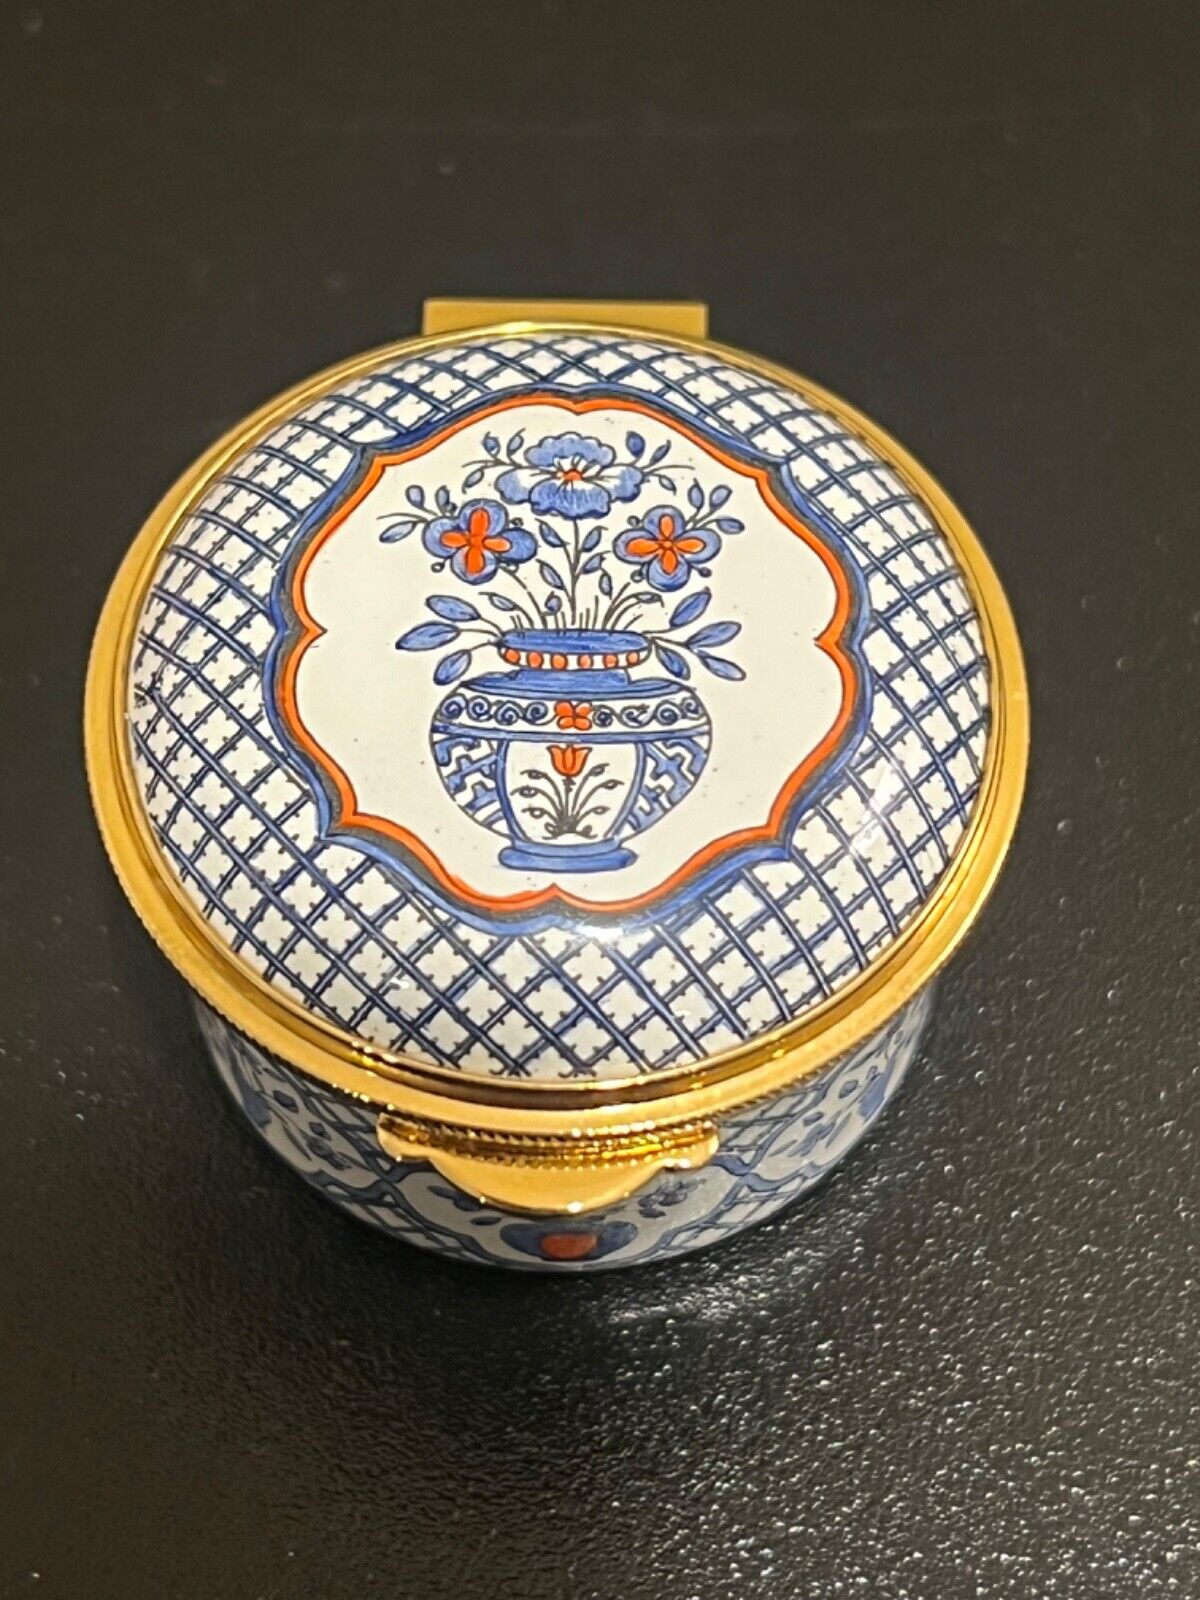 Staffordshire Enamels Pill Box, a gorgeous hand painted 18th Century Treasure